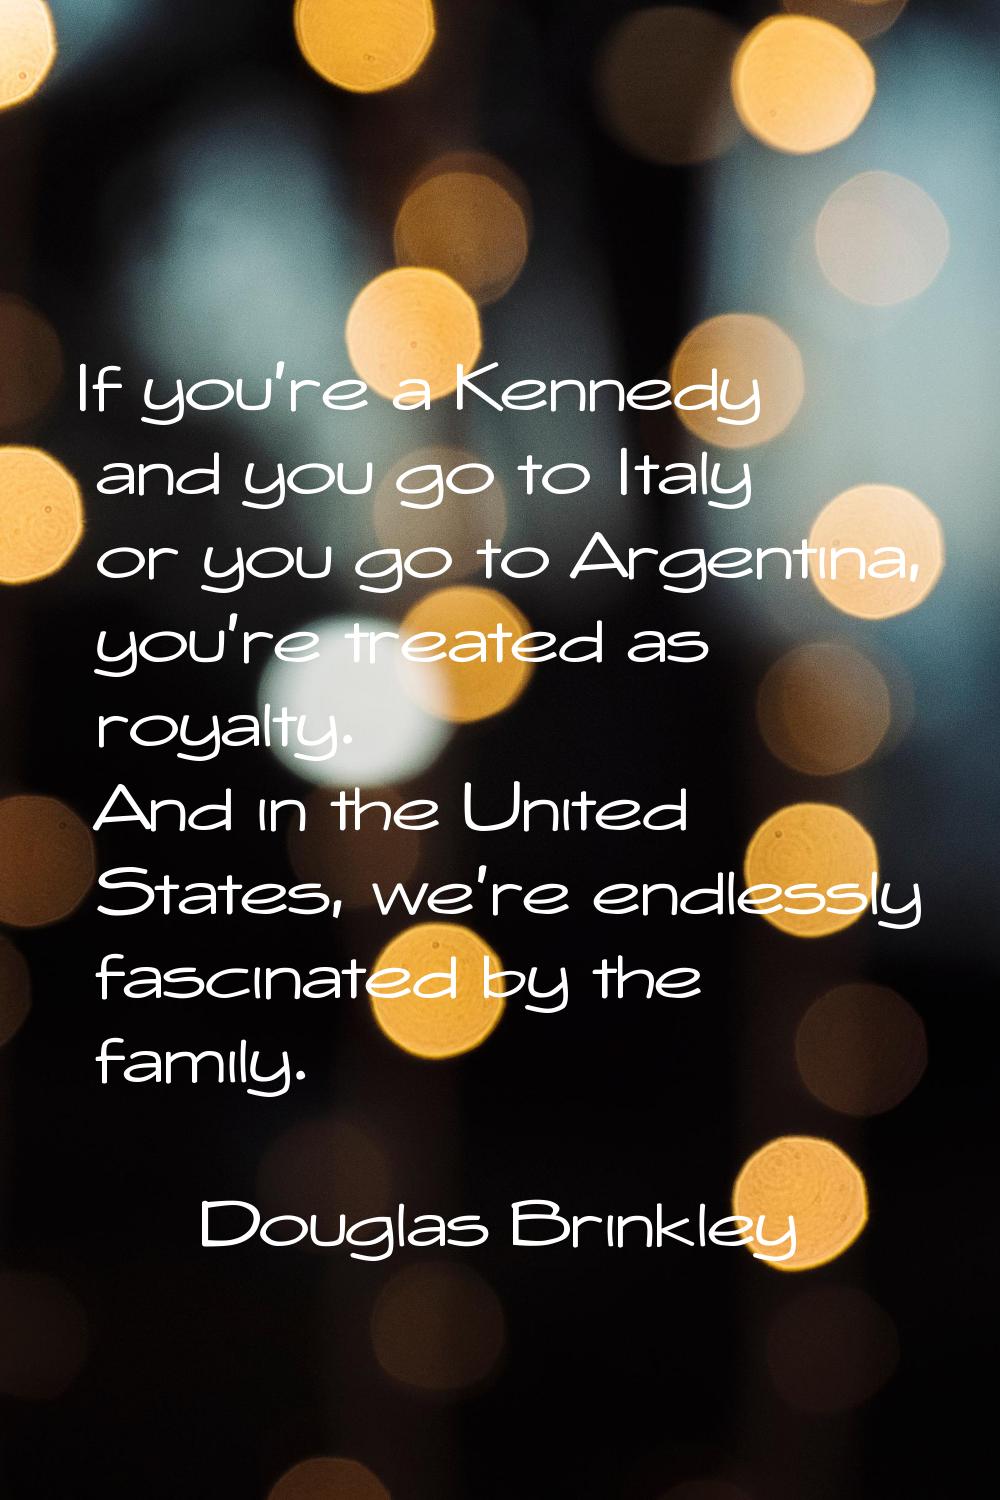 If you're a Kennedy and you go to Italy or you go to Argentina, you're treated as royalty. And in t